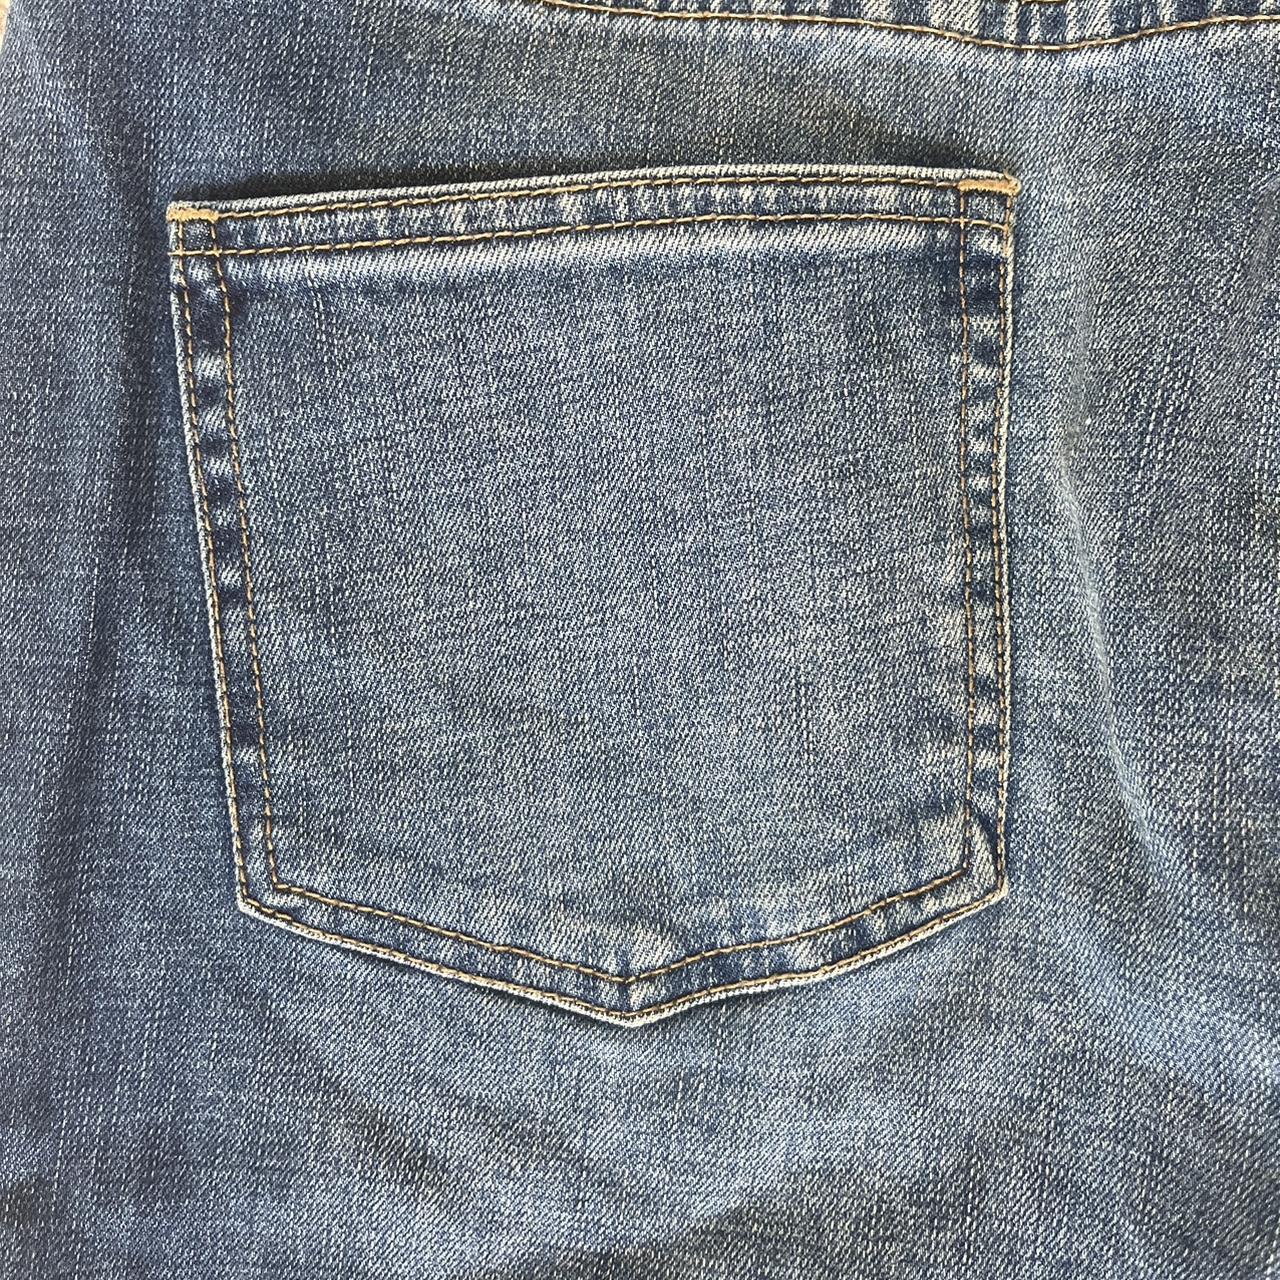 WOMENS COUNTRY ROAD JEANS Good condition low rise... - Depop